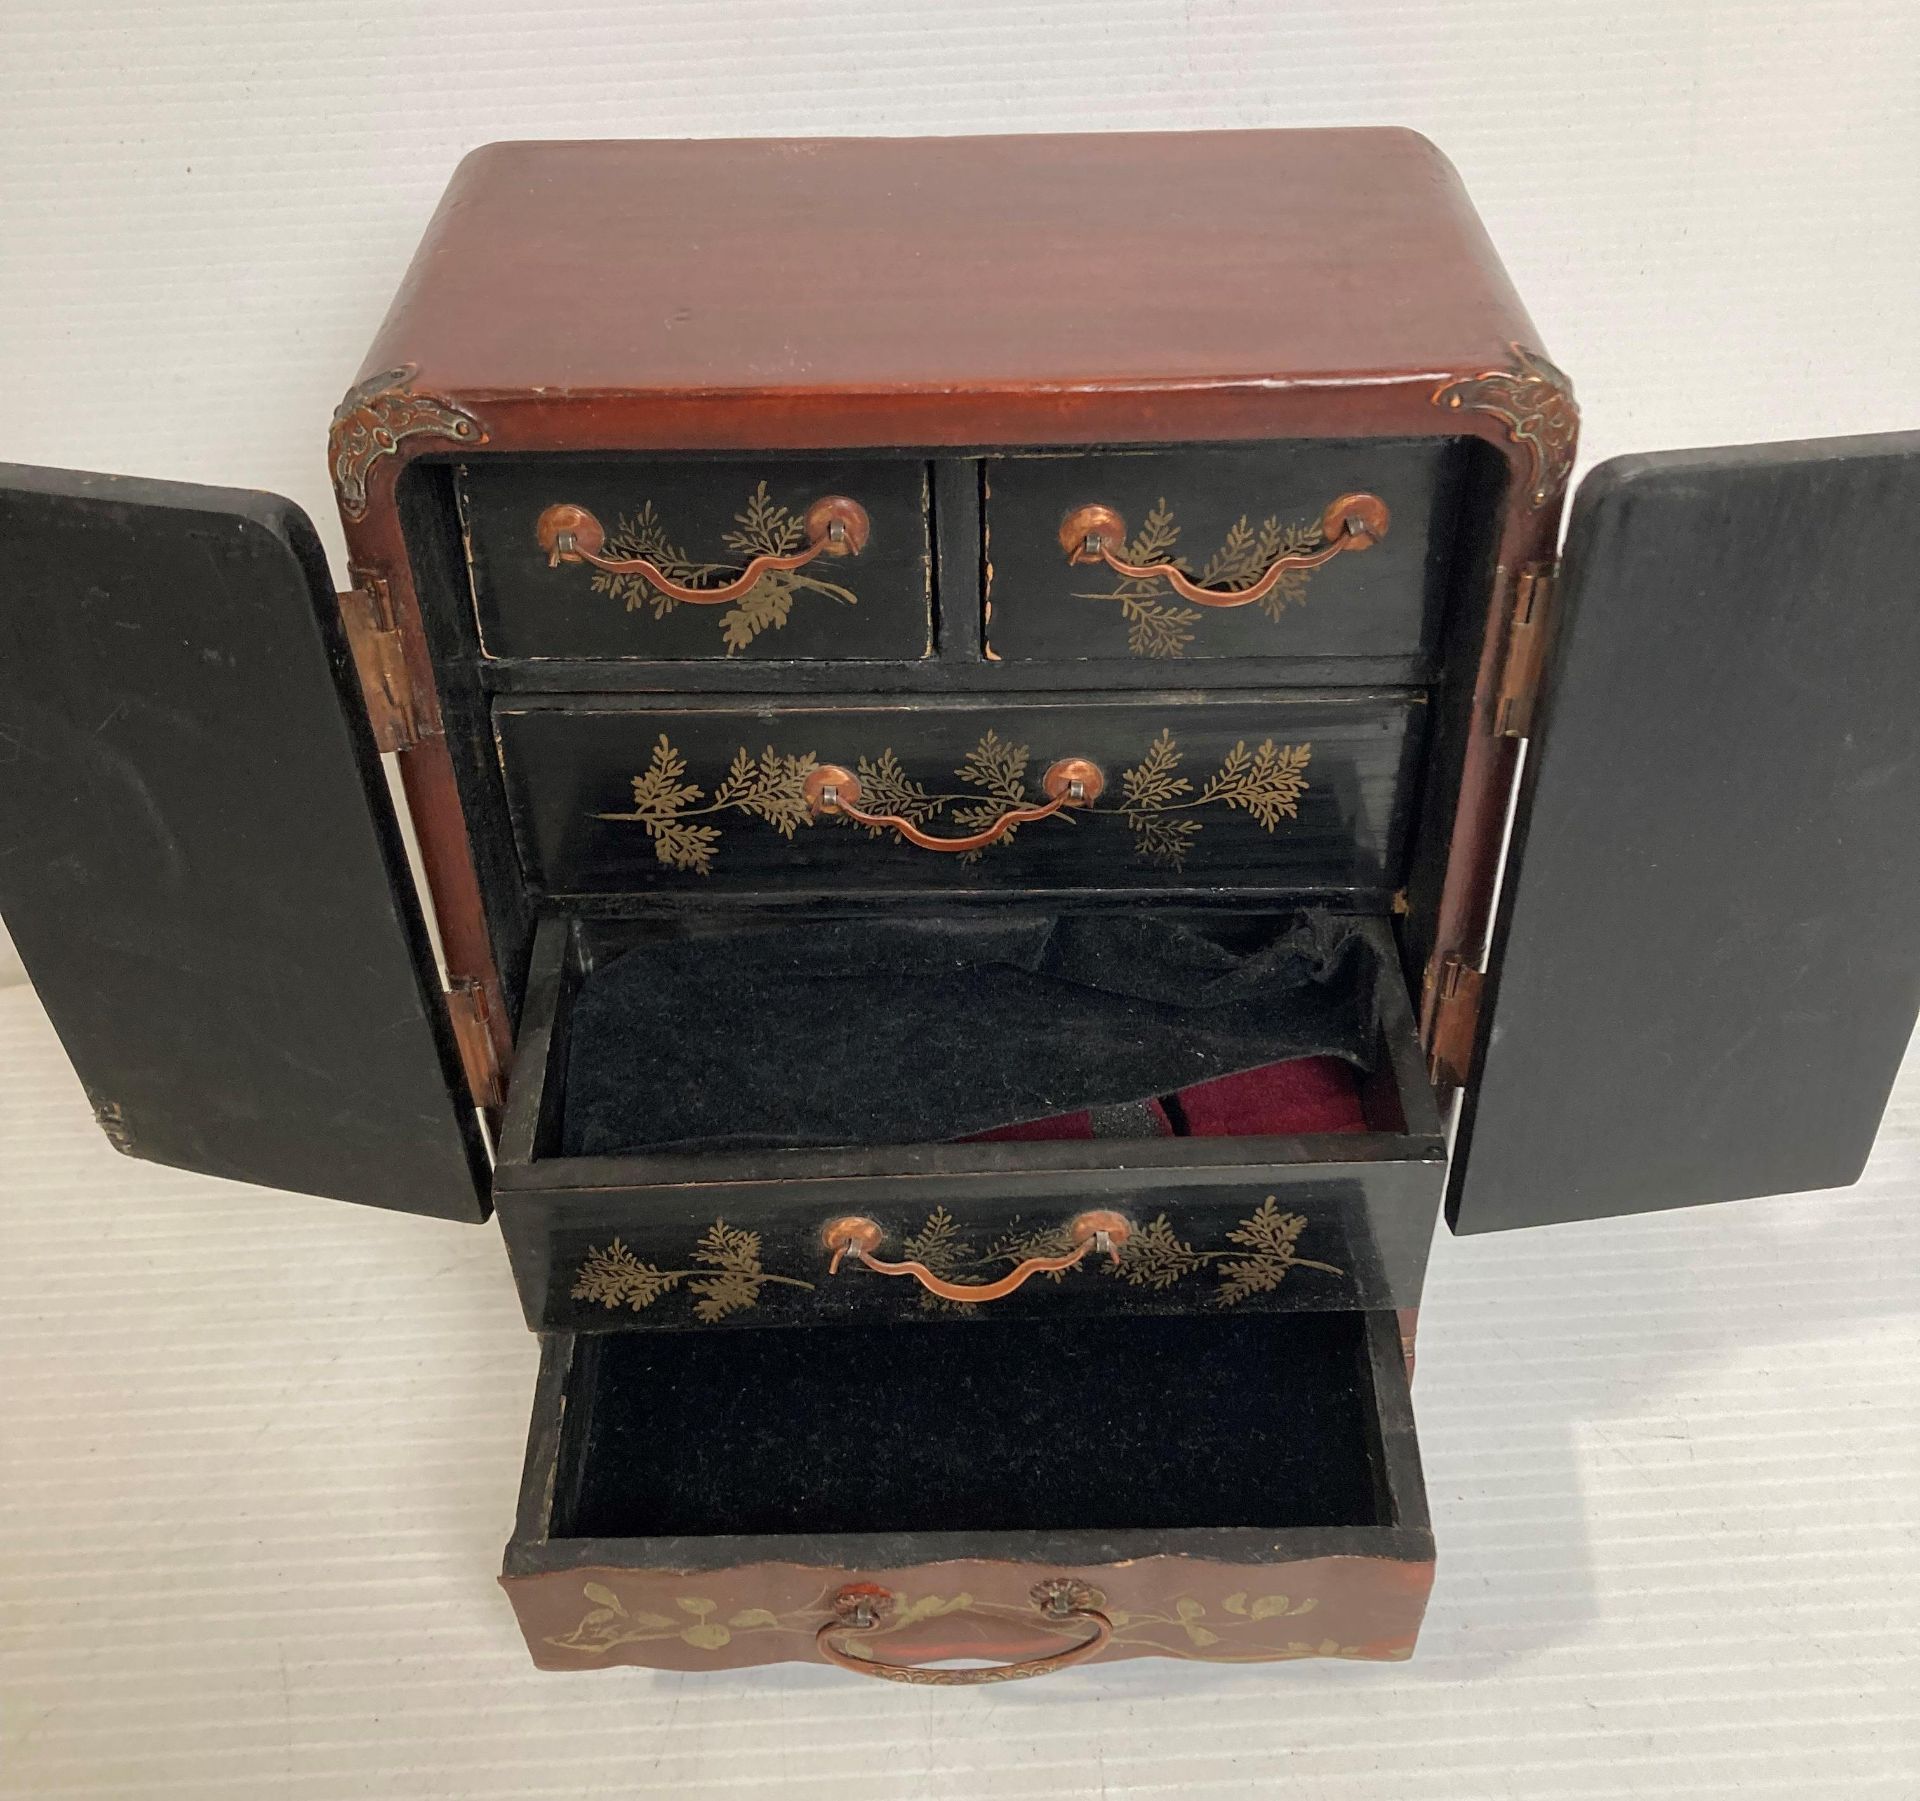 Two assorted Oriental boxes and two wooden circular stands (saleroom location: S2 QB14) - Image 6 of 8